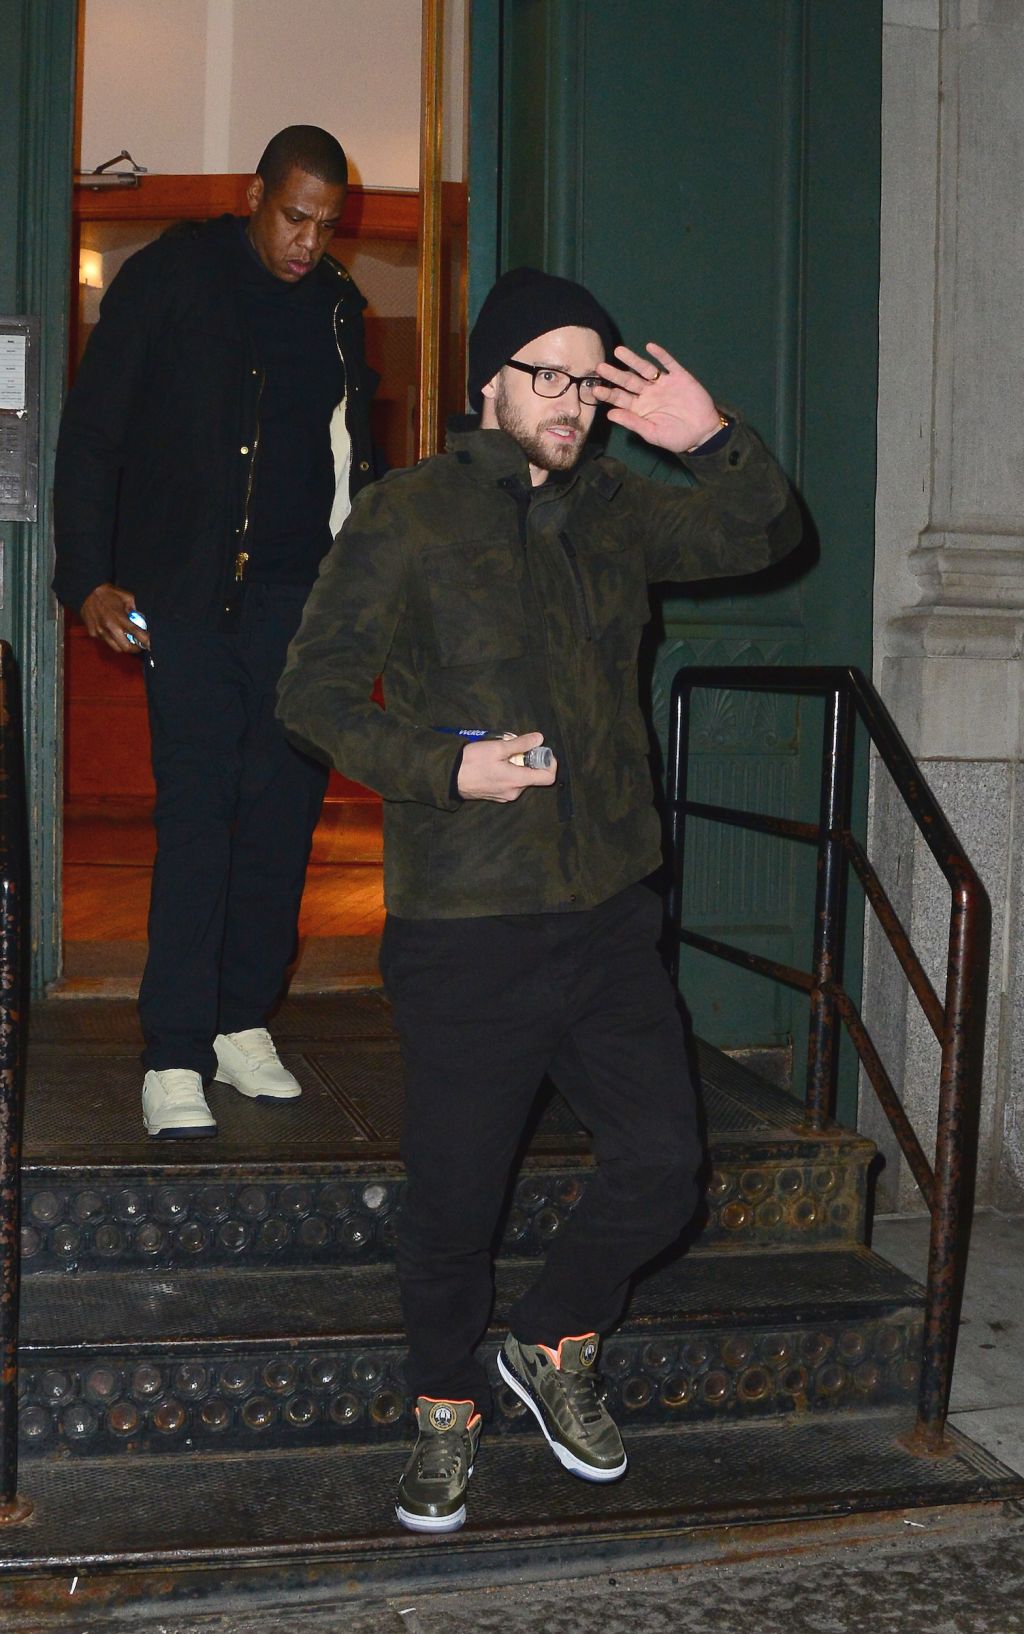 Jay-Z and Justin Timberlake coming out of Taylor Swift's home in NYC